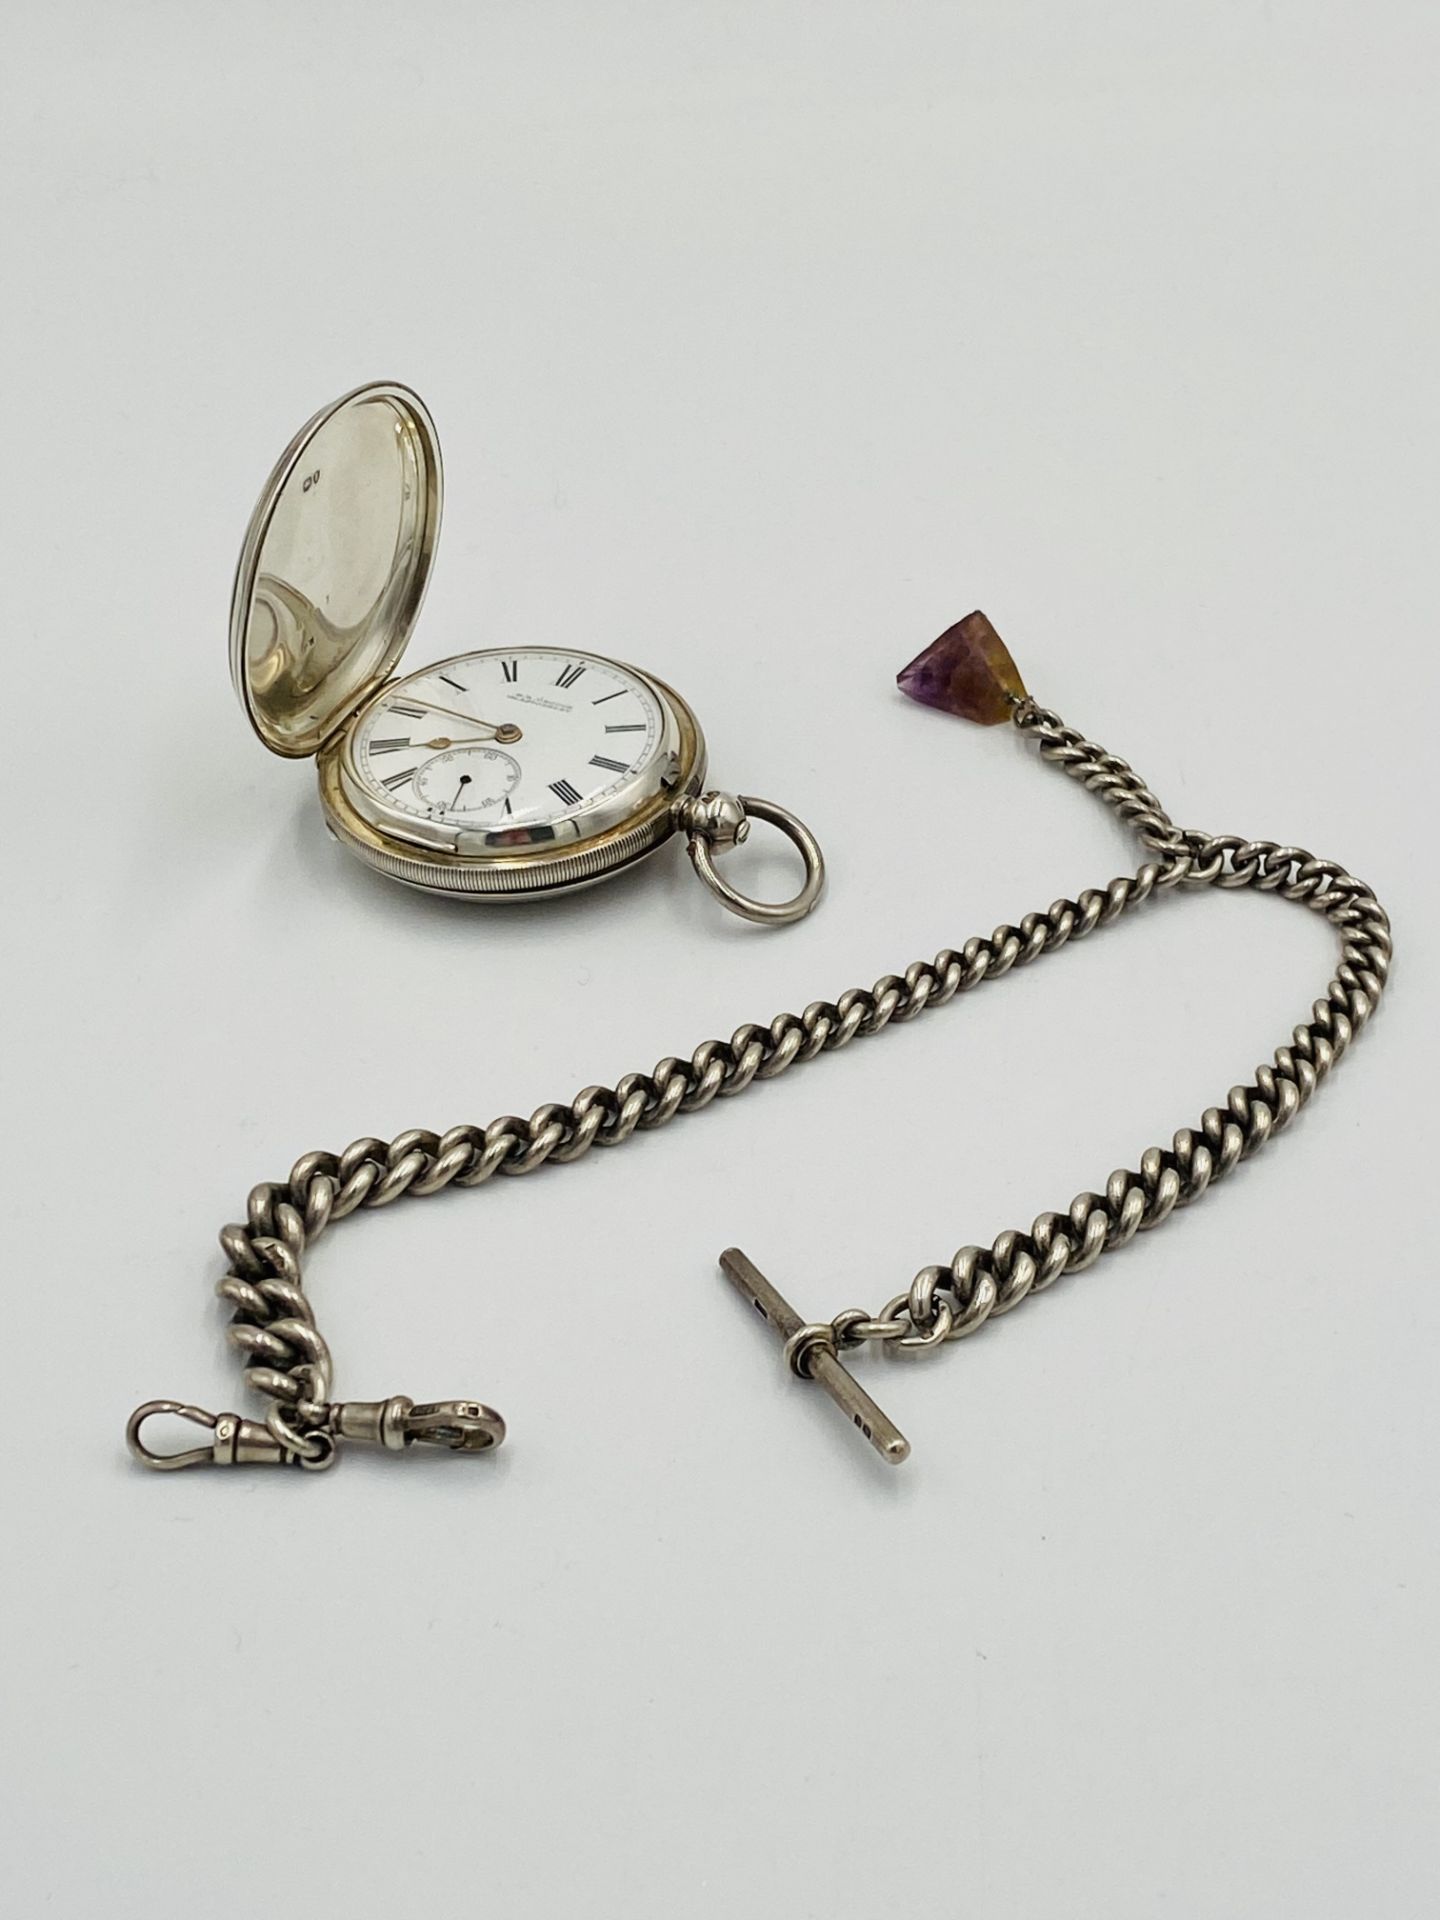 Victorian silver pocket watch together with a silver fob chain